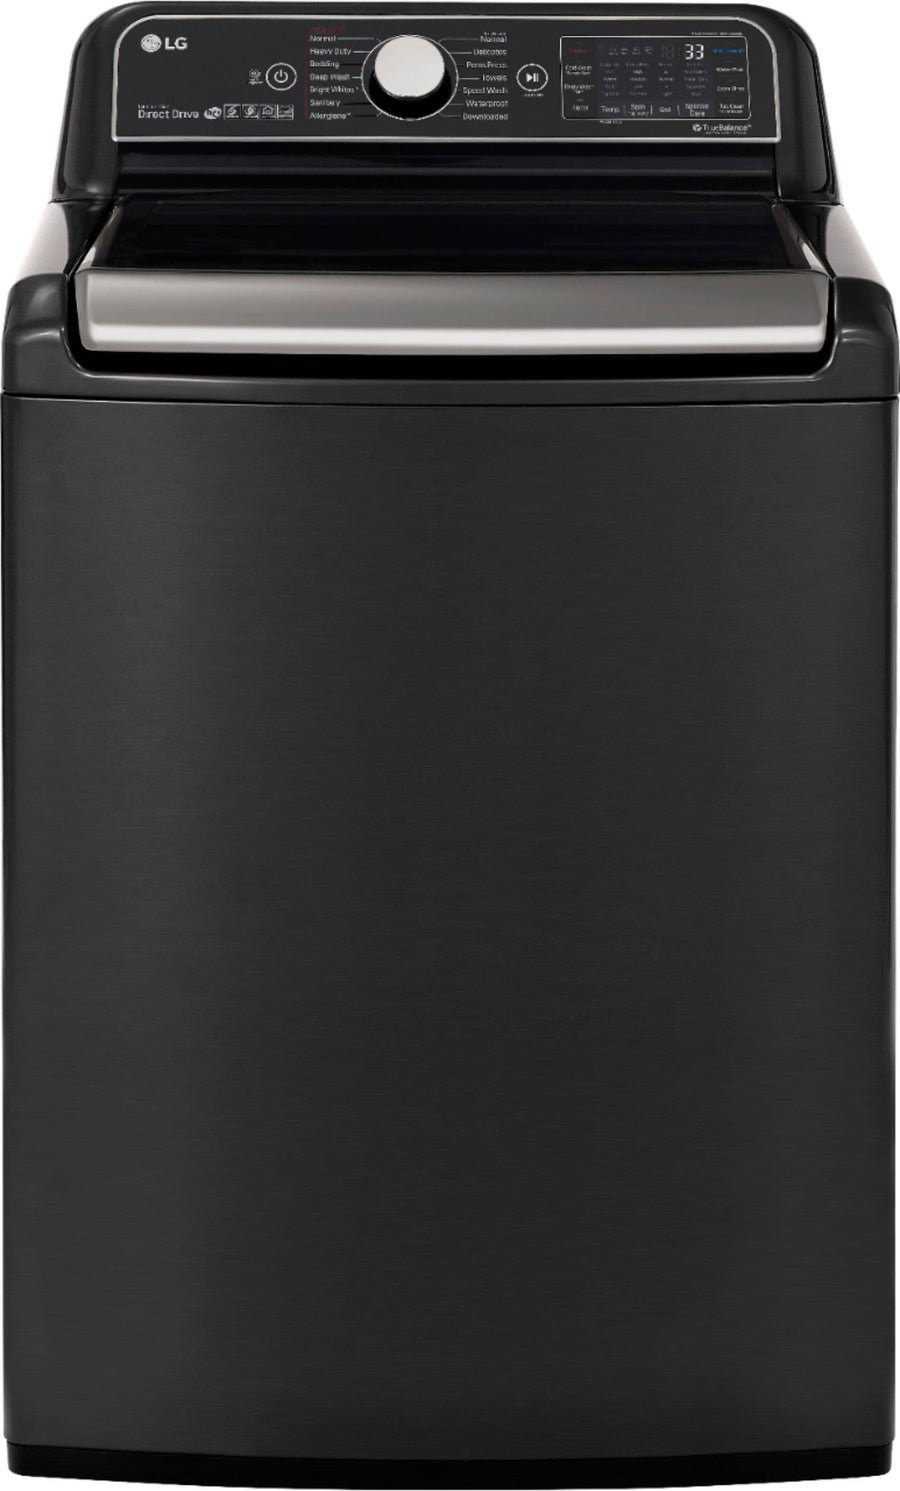 LG - 5.5 Cu. Ft. High-Efficiency Smart Top Load Washer with Steam and TurboWash3D Technology - Black steel_0